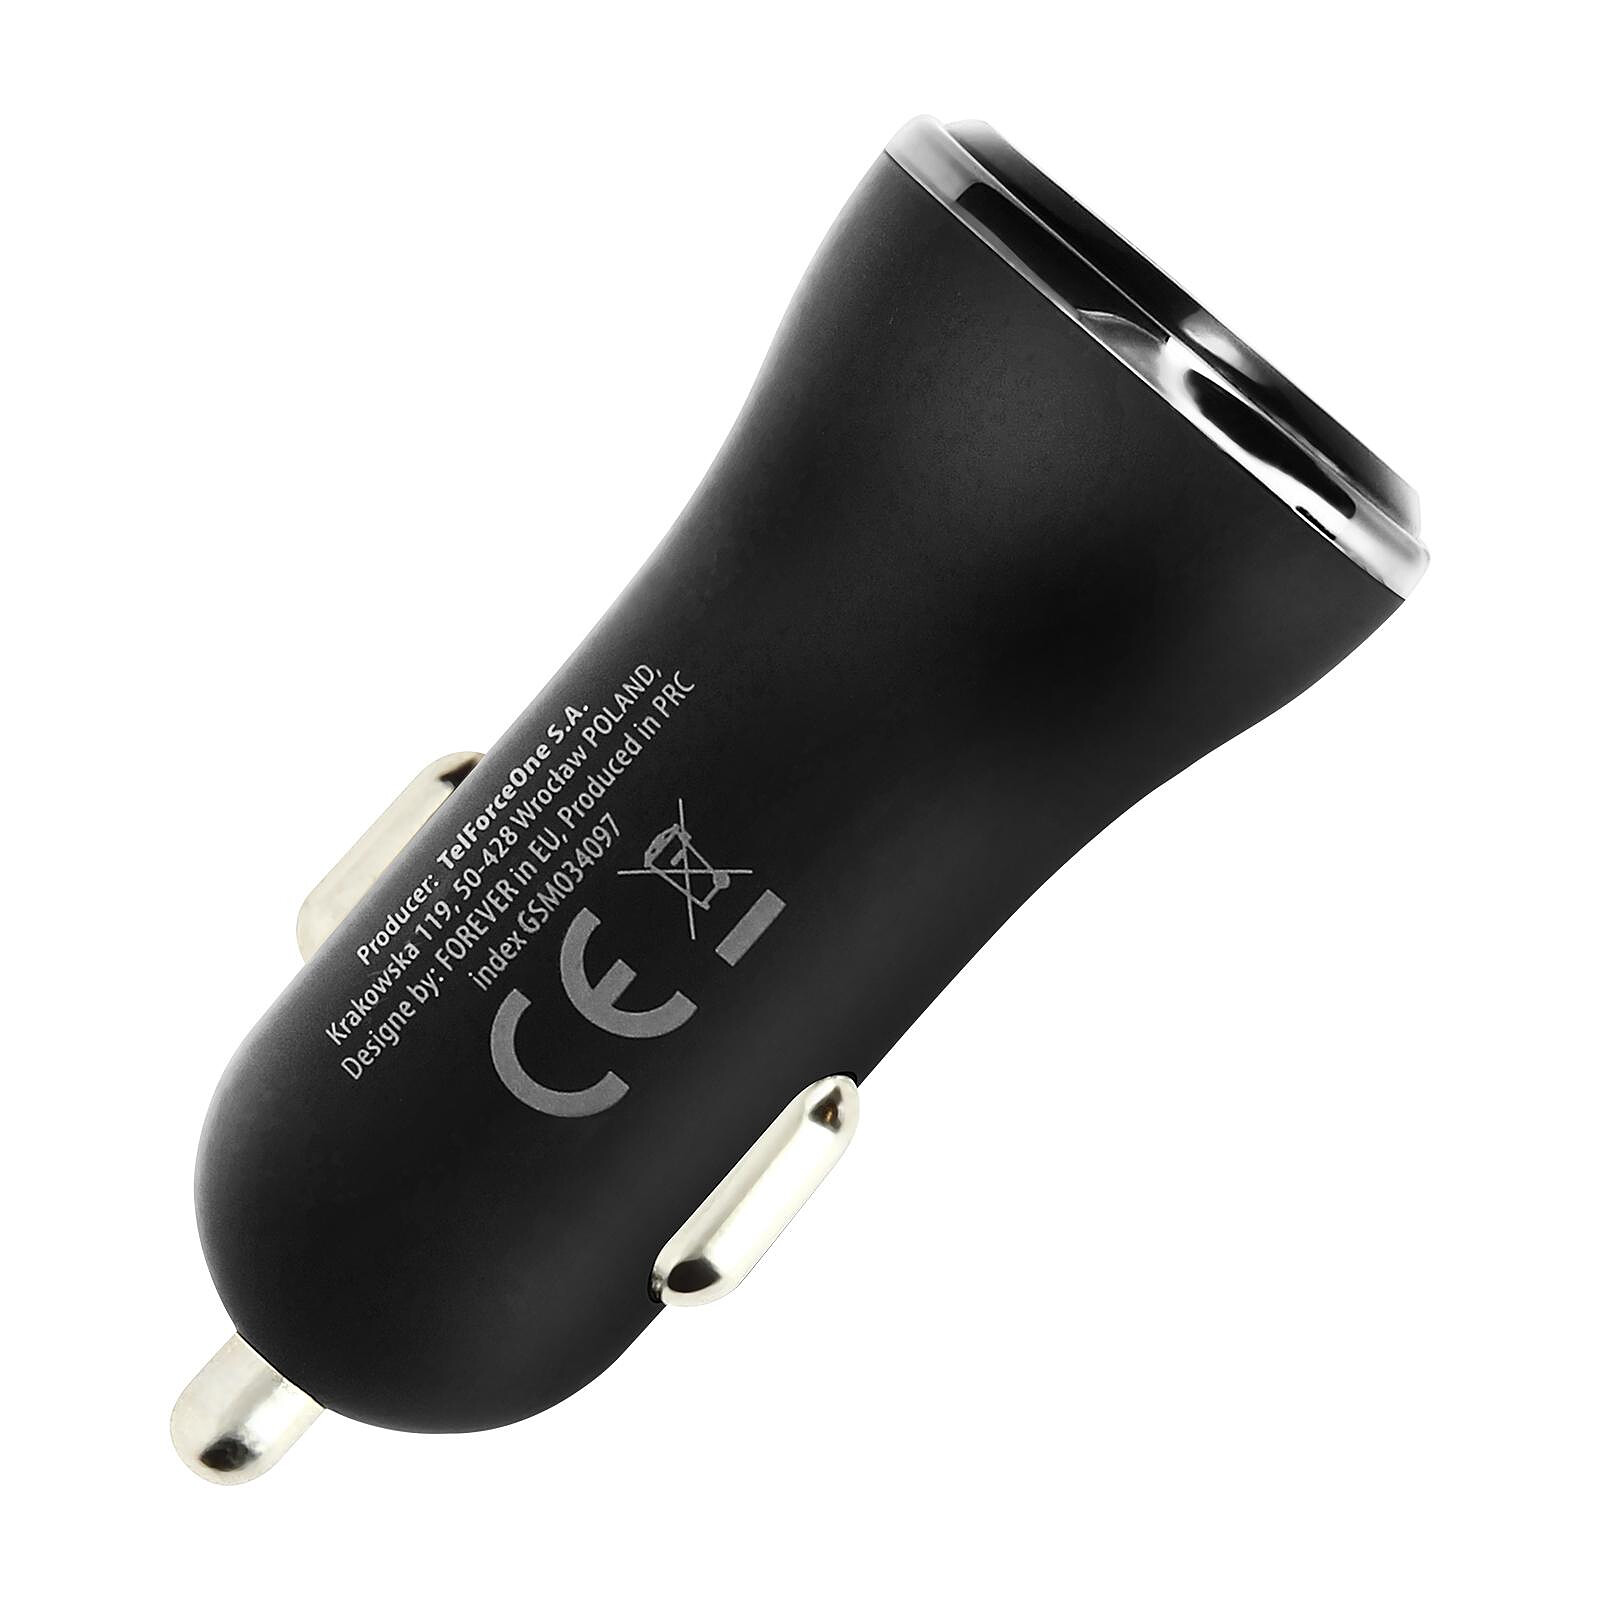 chargeur Prise Allume cigare 9 Volts 2 A prise alim 2.5/5.5 mm